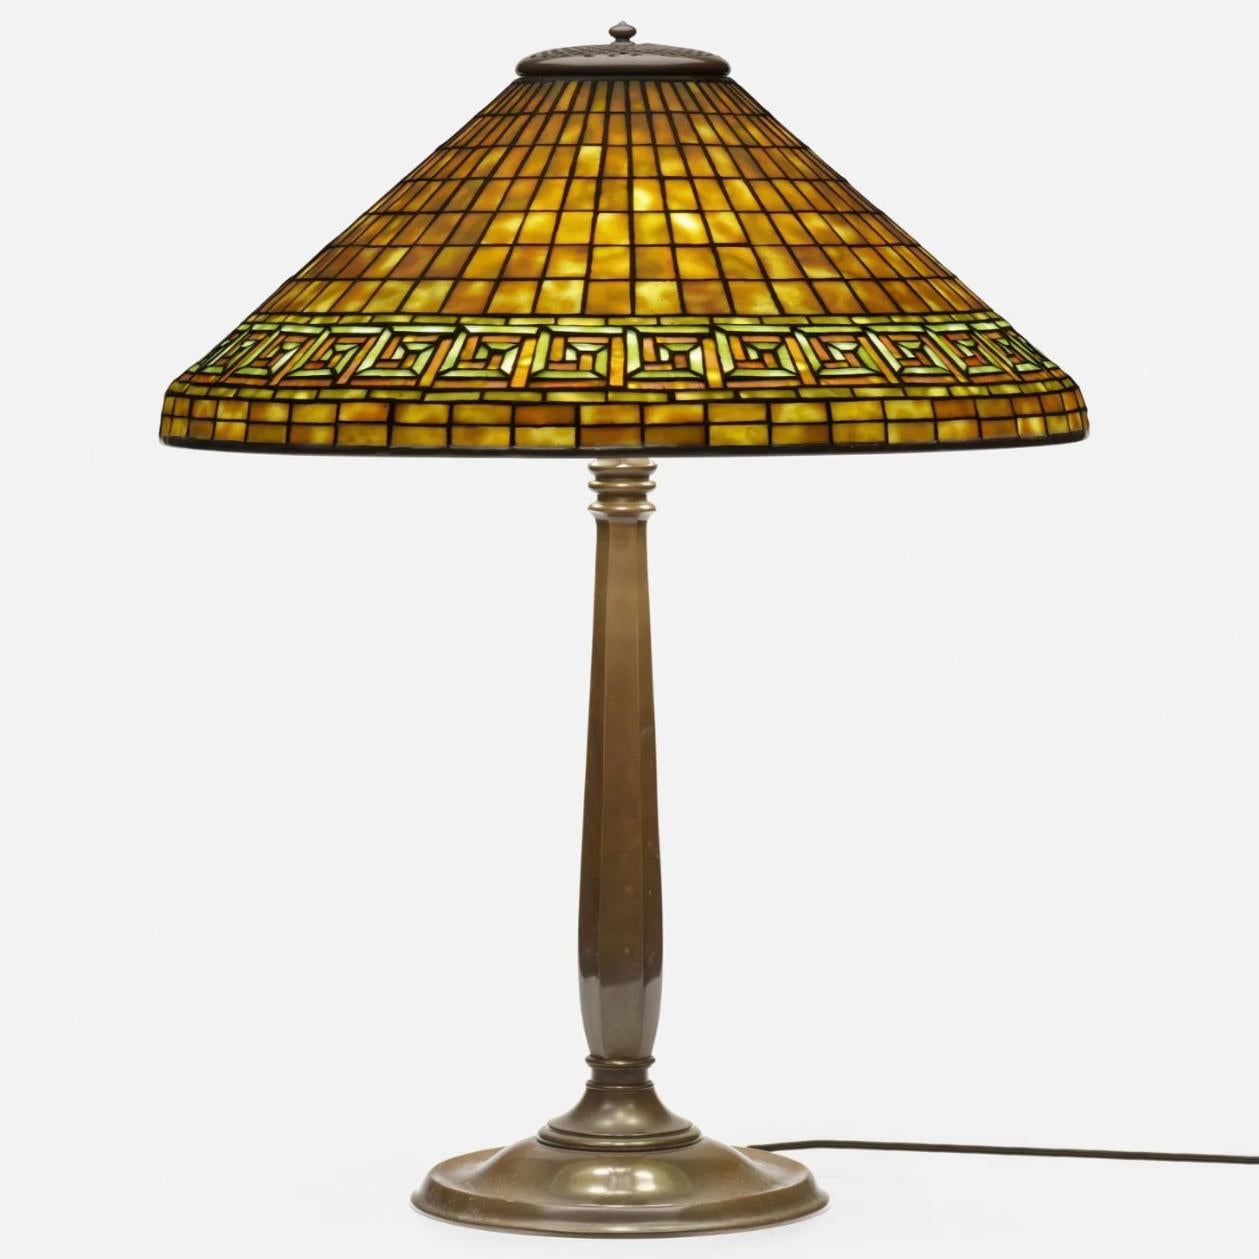 Tiffany Studios Greek key table lamp
New York, USA, circa 1910
leaded glass, patinated bronze
Dimensions: 26 height x 20 diameter in (66 x 51 cm)

Lamp features a Colonial Library Standard base with rich chocolate brown patina and a leaded